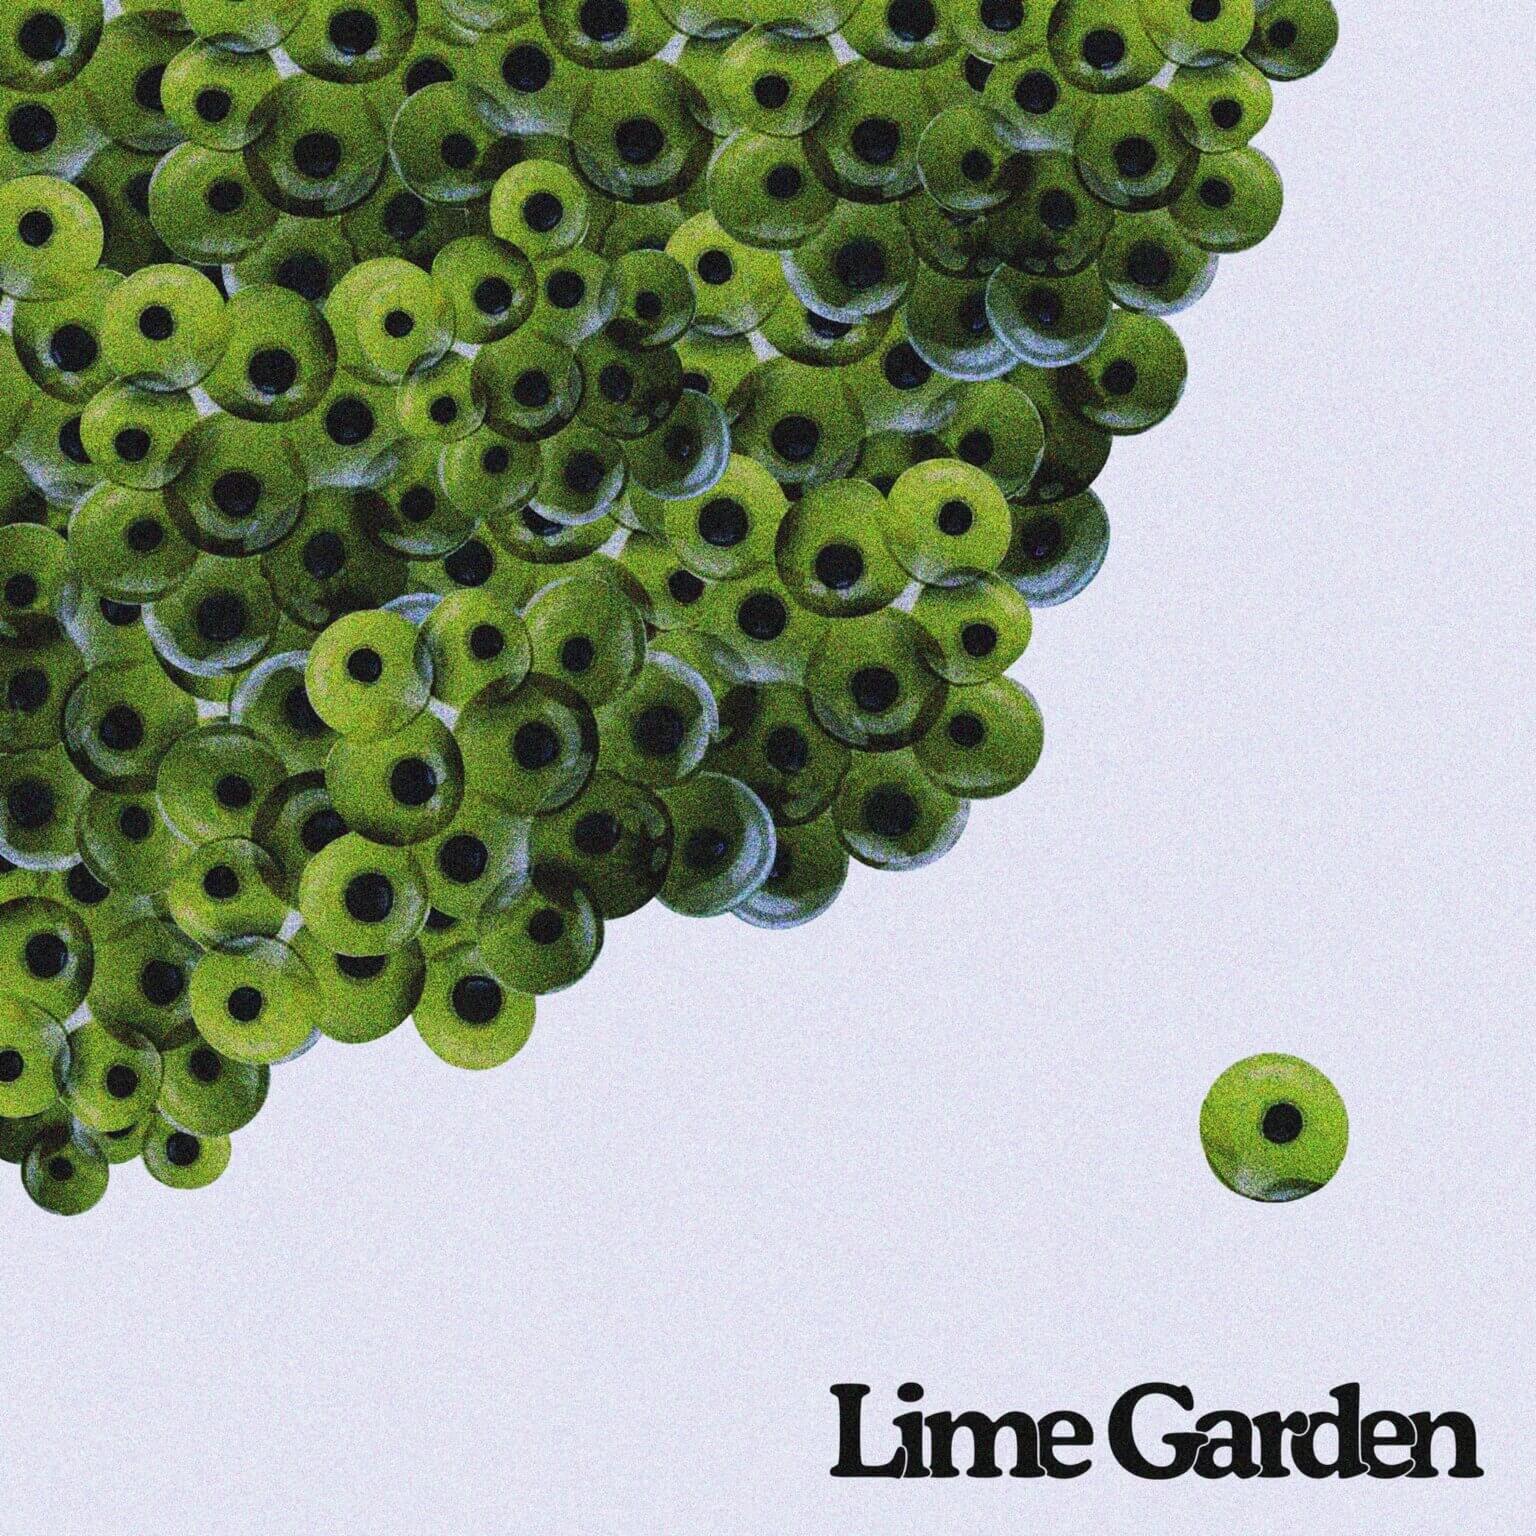 "Marbles" by Lime Garden is Northern Transmissions Song of the Day. The British trio's single is now available via So Young Records